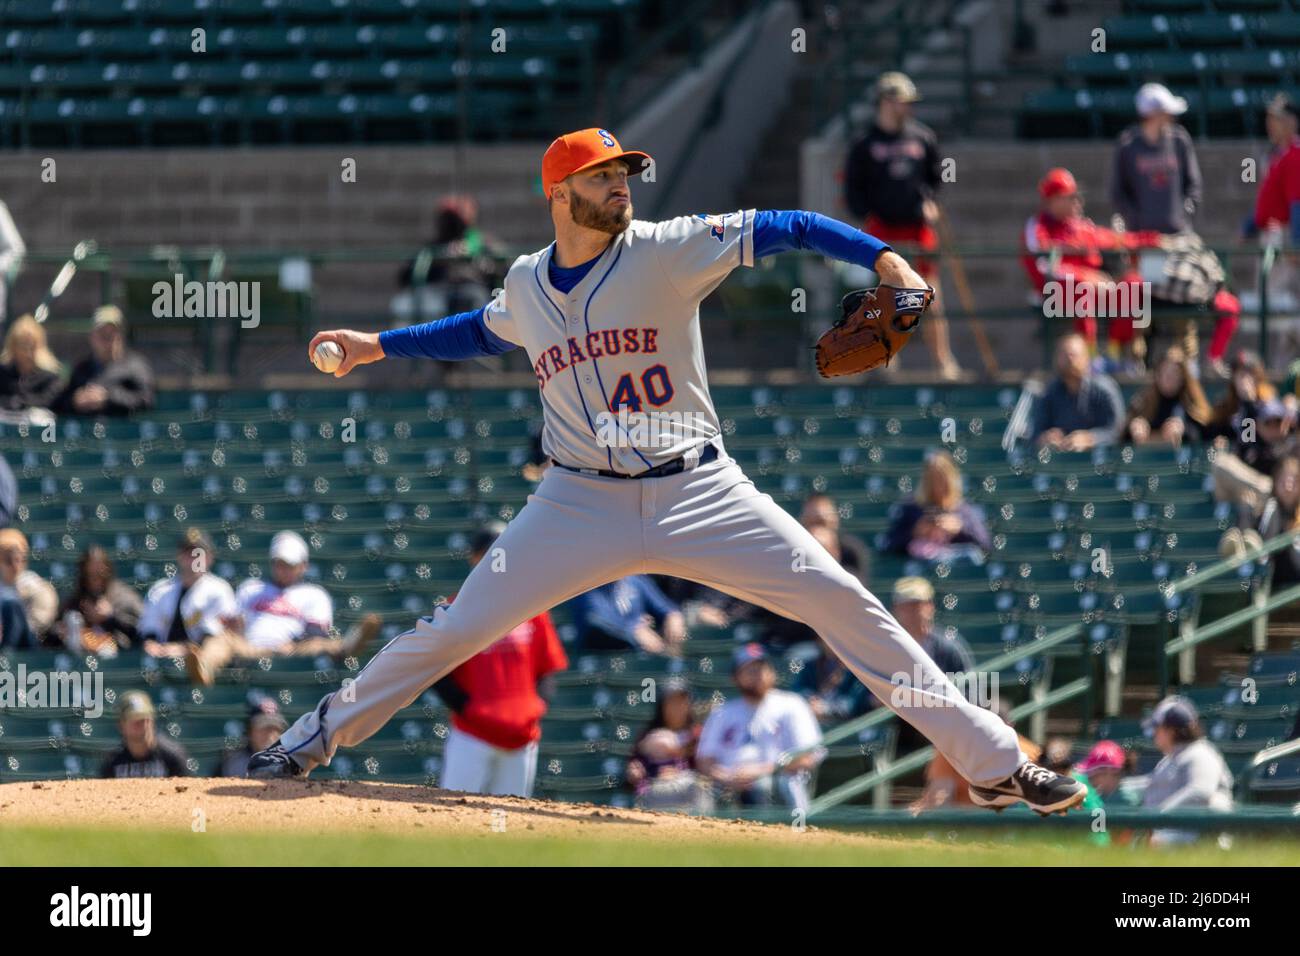 April 30, 2022: Syracuse Mets pitcher Tim Adleman (40) throws a pitch in a game against the Rochester Red Wings. The Rochester Red Wings hosted the Syracuse Mets in an International League game at Frontier Field in Rochester, New York. (Jonathan Tenca/CSM) Stock Photo